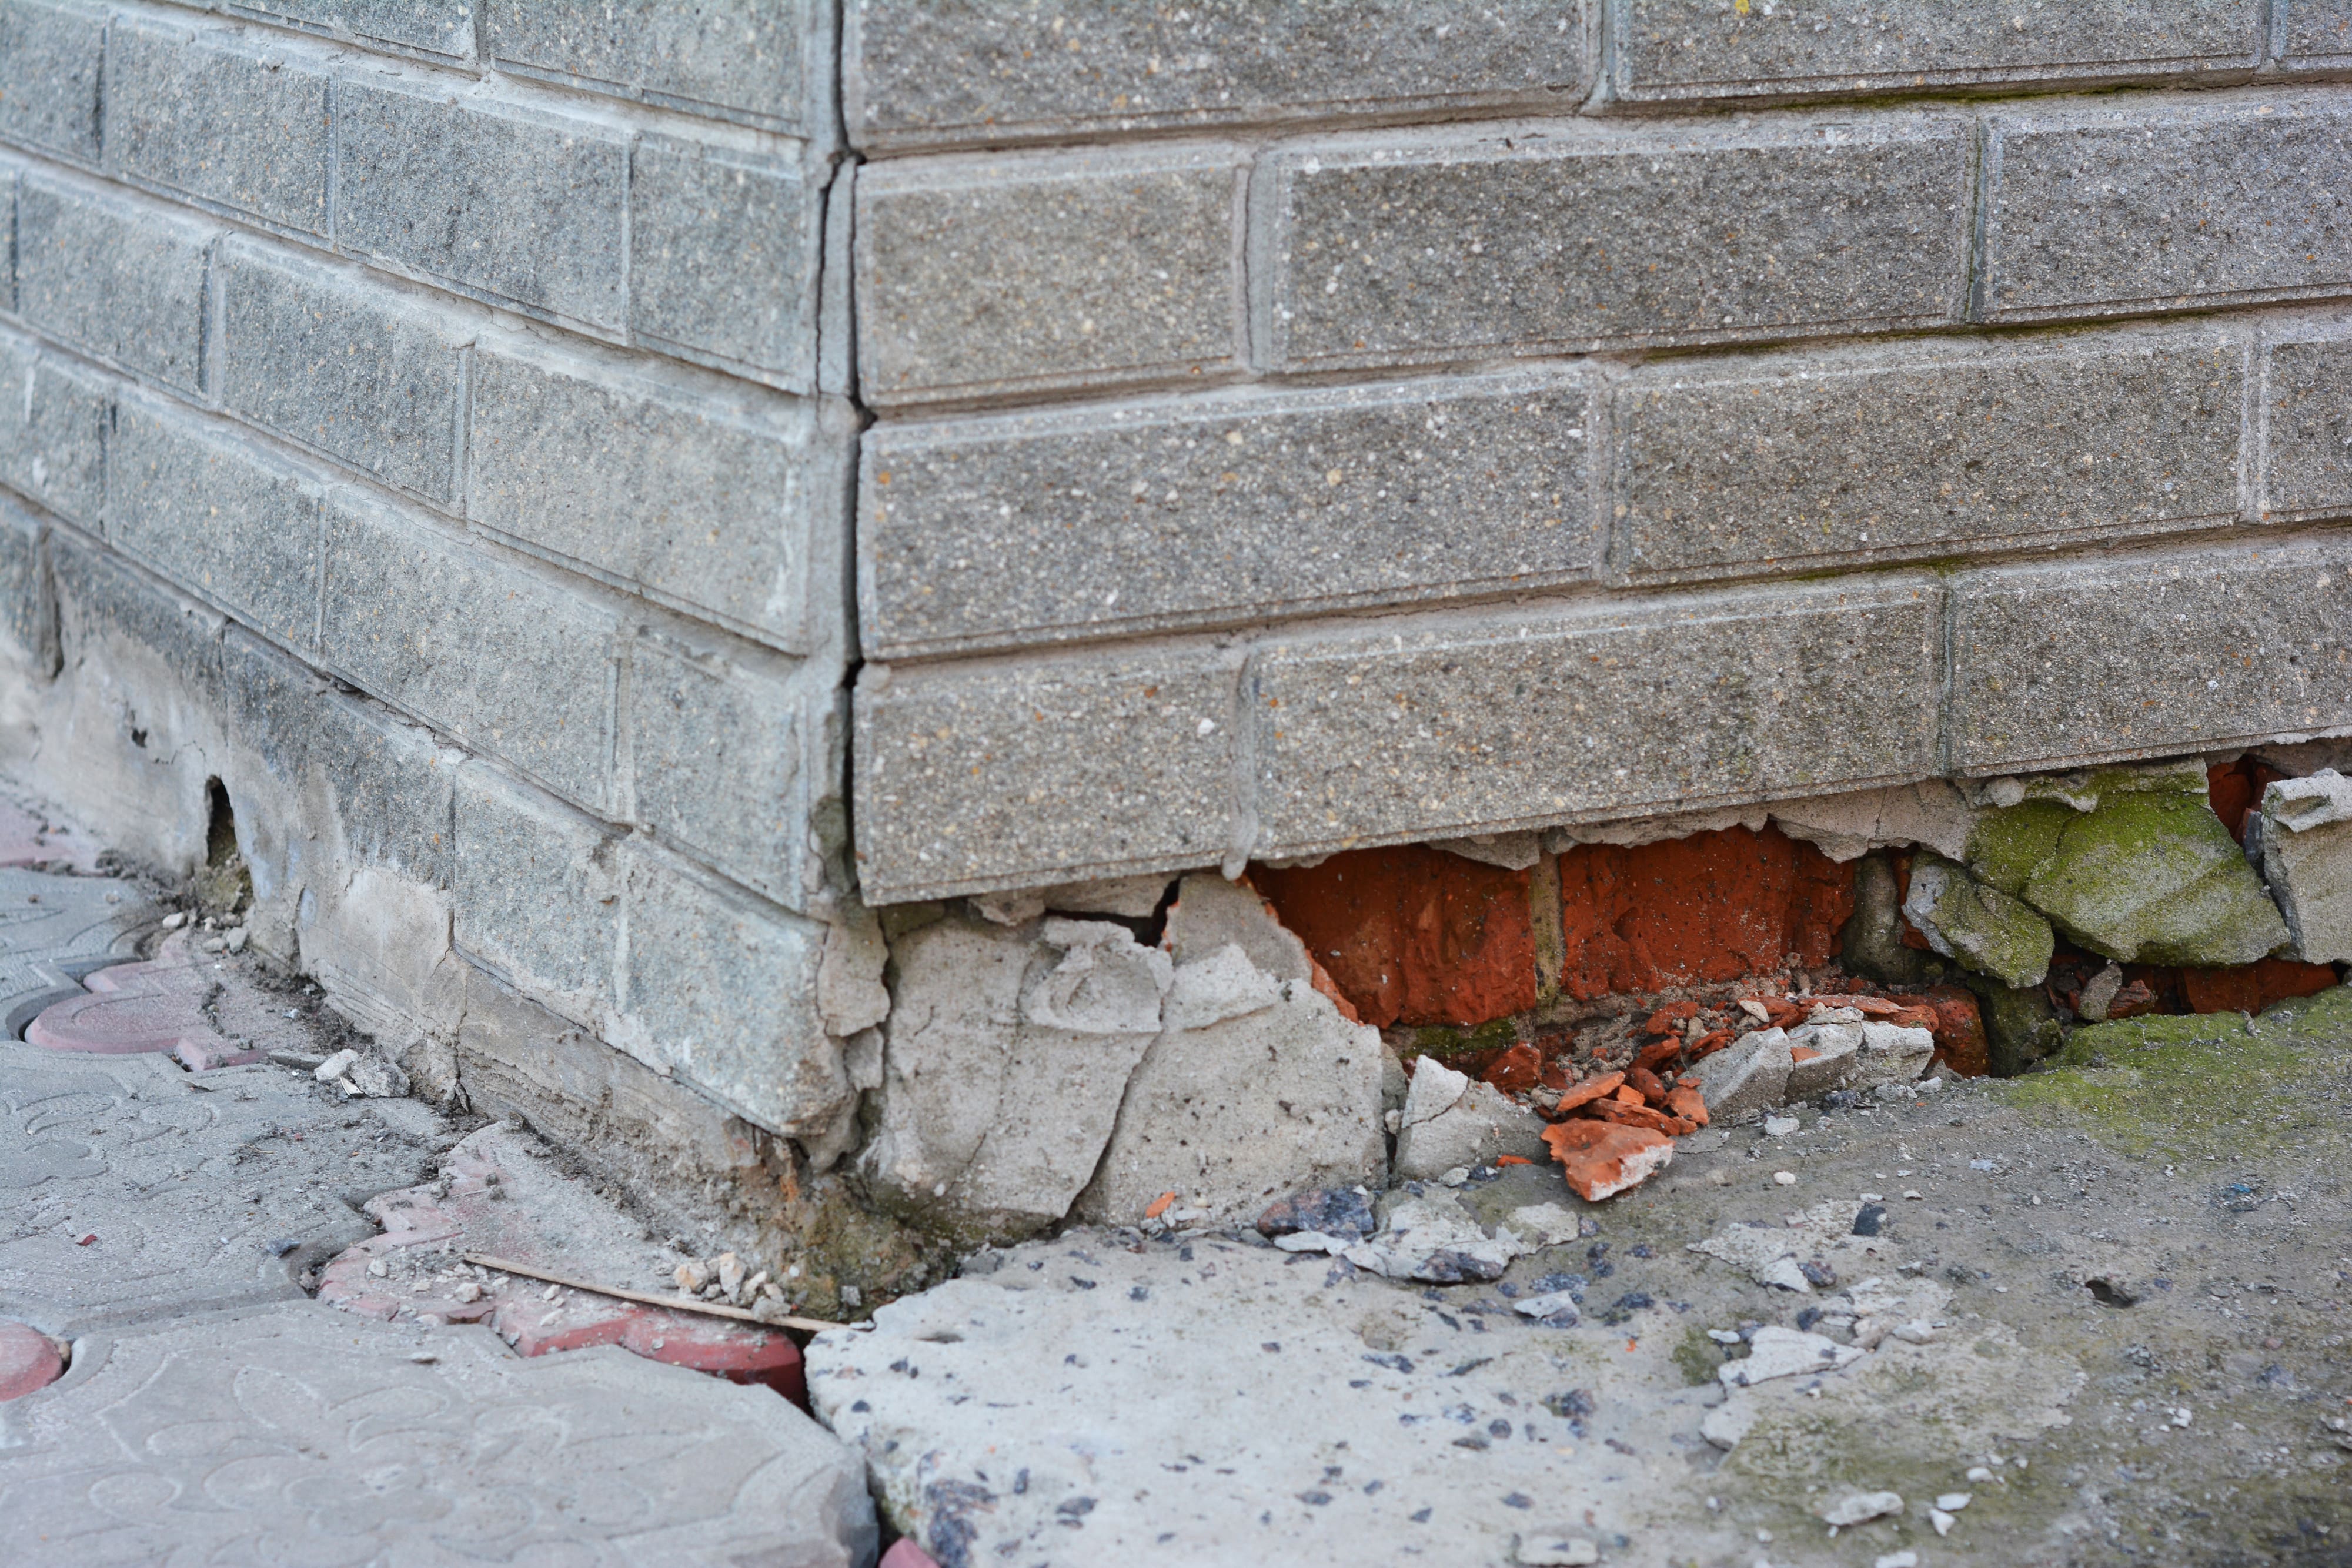 A damaged house foundation in need of water damage restoration